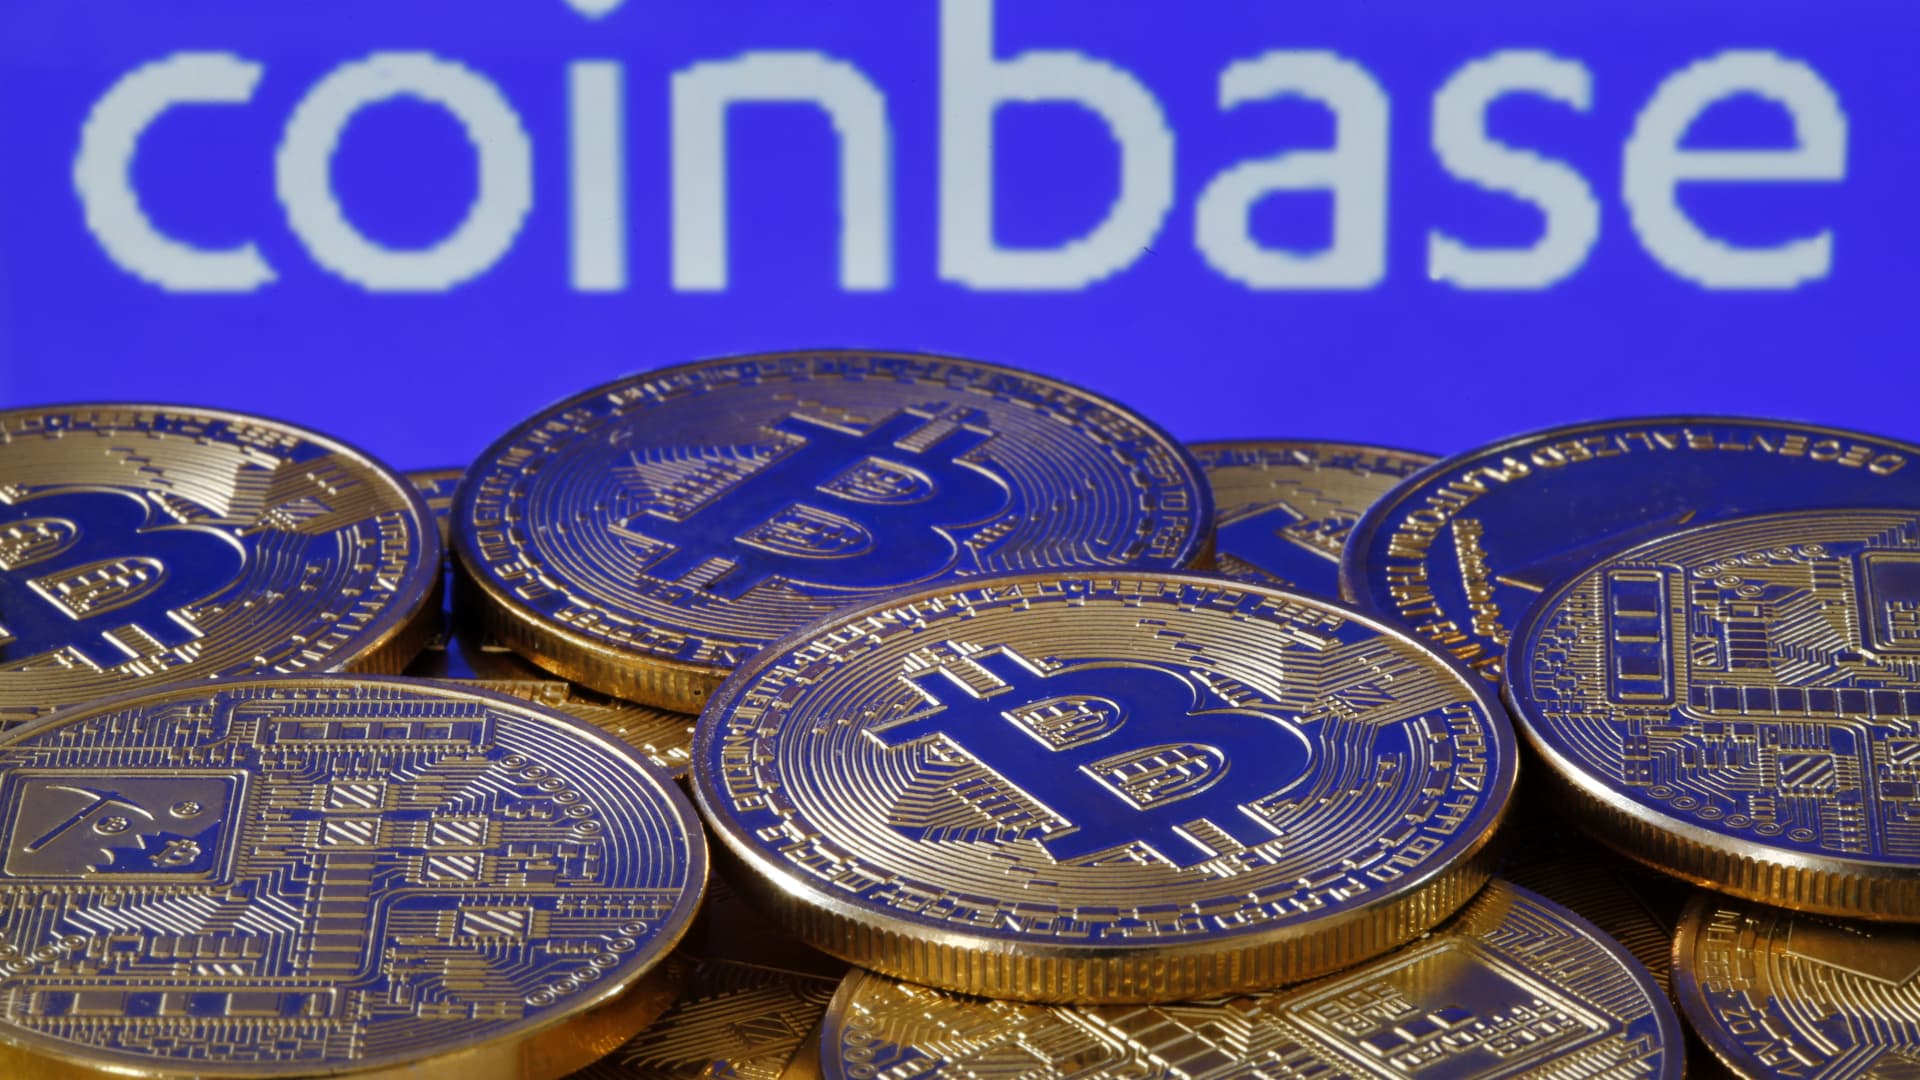 Coinbase review: A crypto exchange for new investors and traders